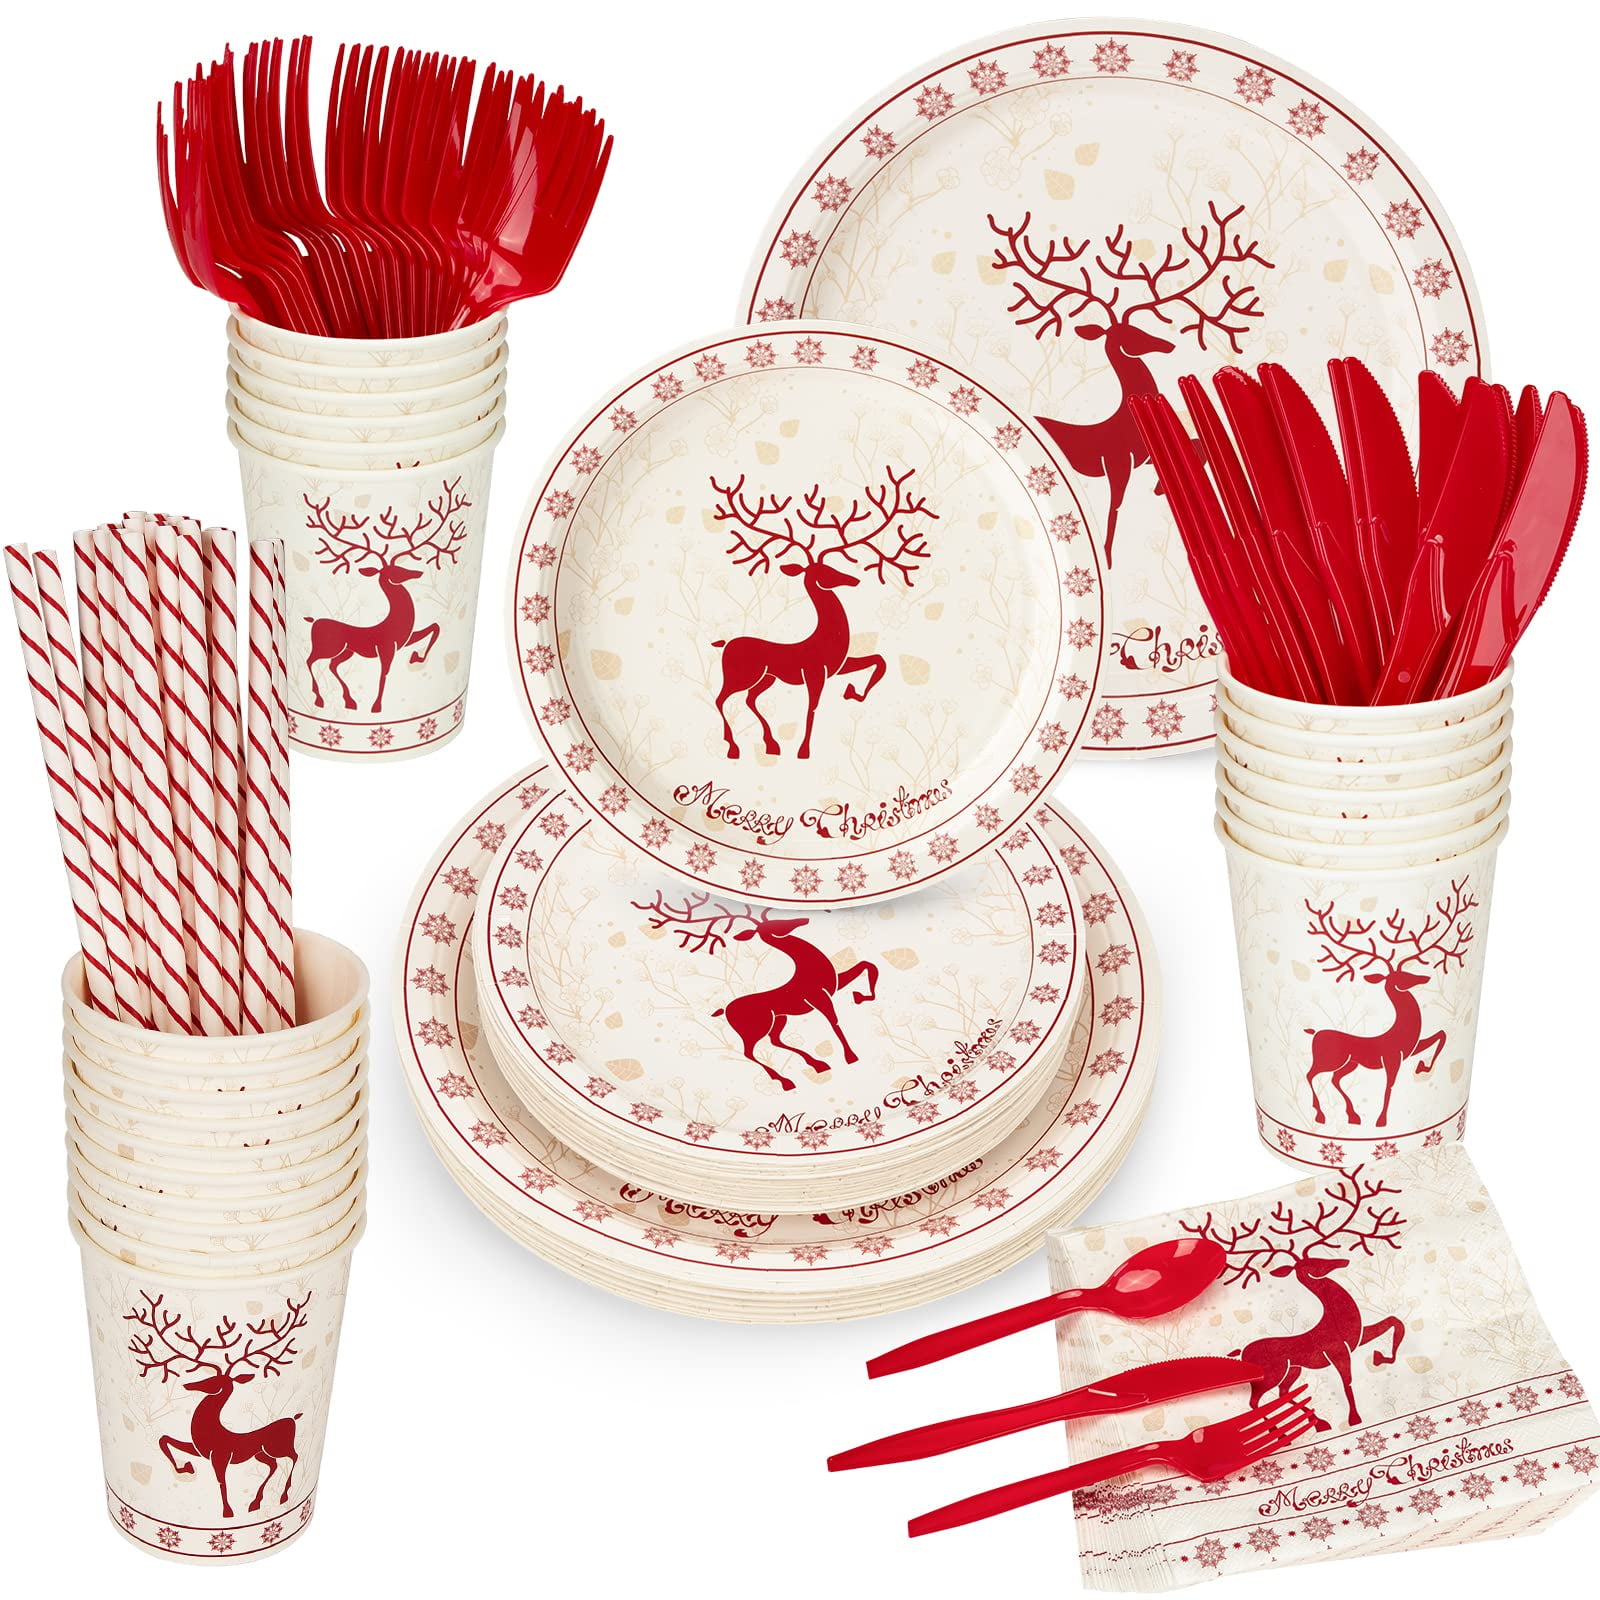 Classic Christmas Tableware Pack: Disposable Paper Plates, Napkins and Cups  Set for 20